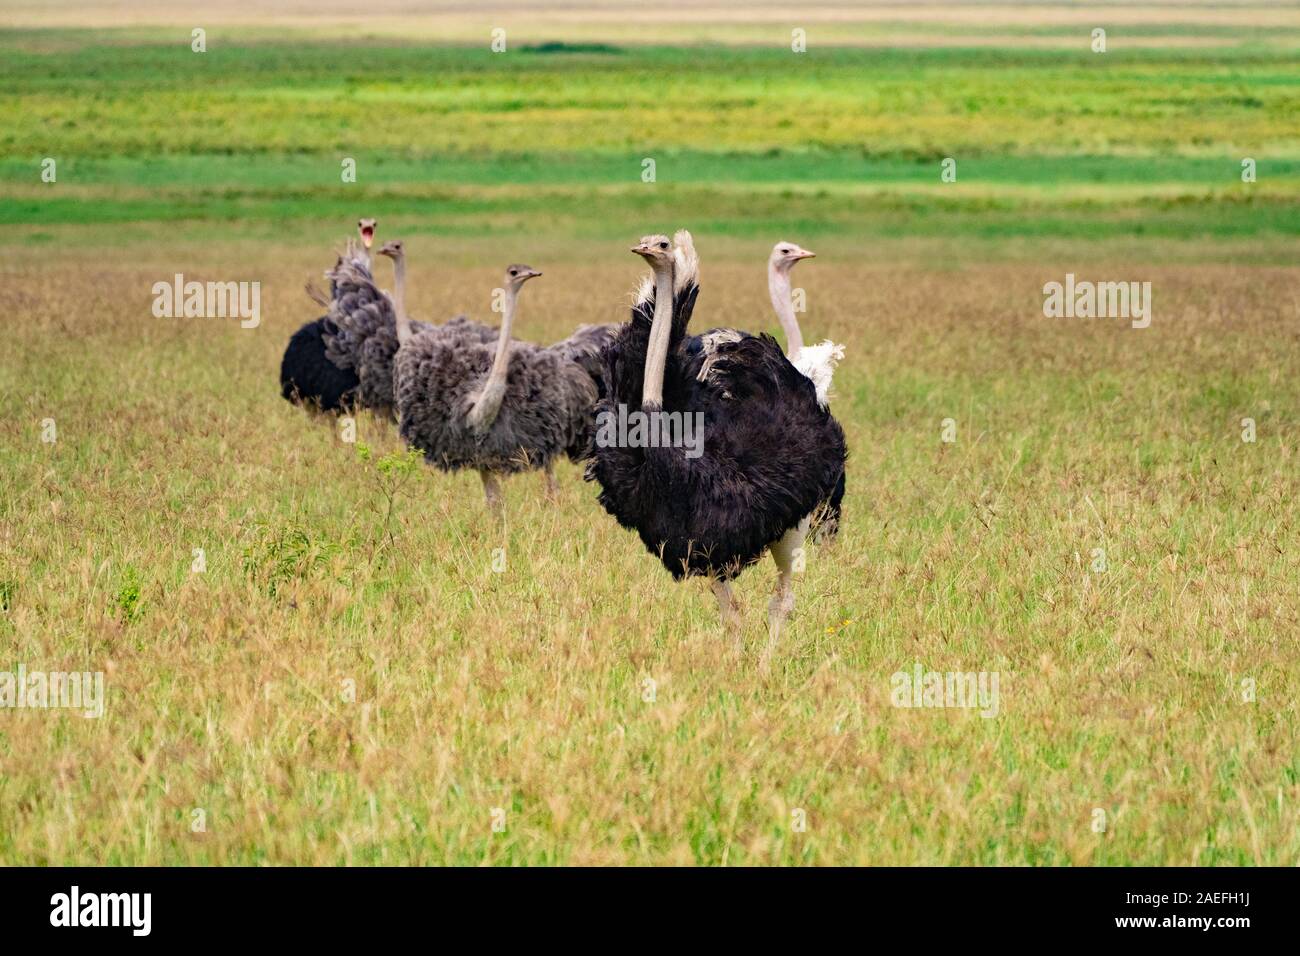 Family of ostriches in Ngorongoro Crater. Stock Photo